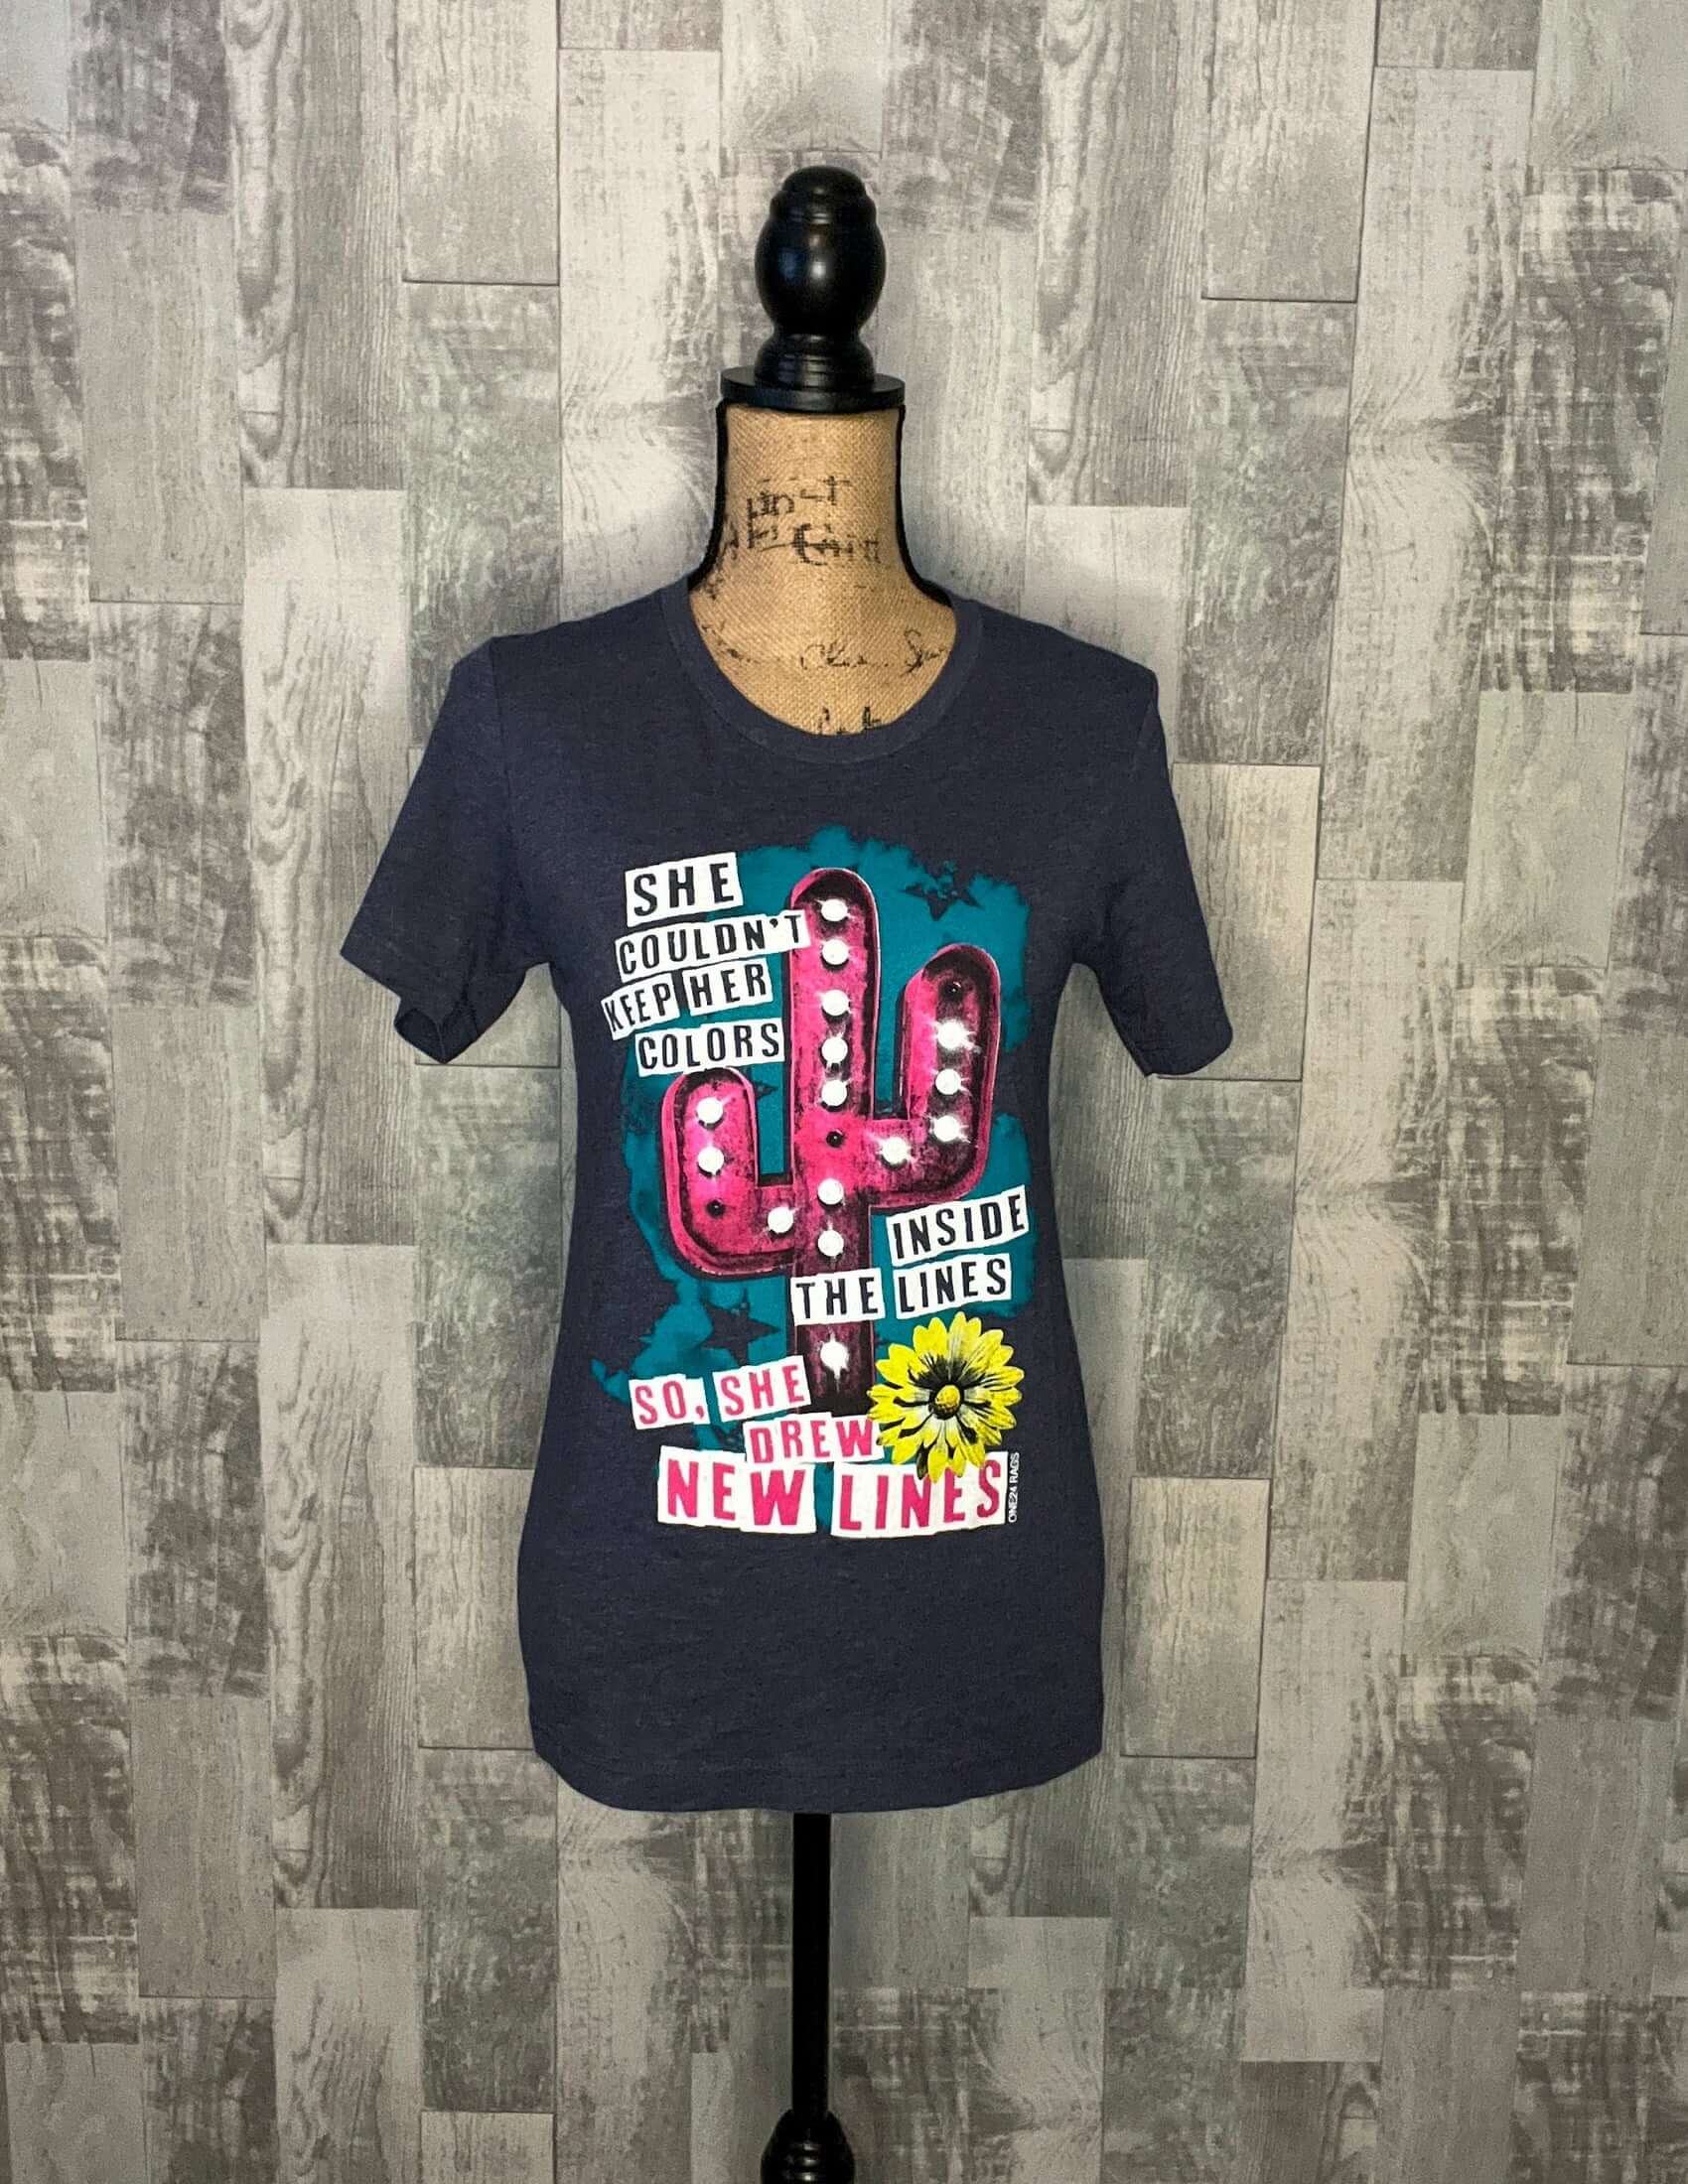 graphic tees clothing, draw new lines, graphic tees, i am woman, tops Size: Medium, Large, Extra Large